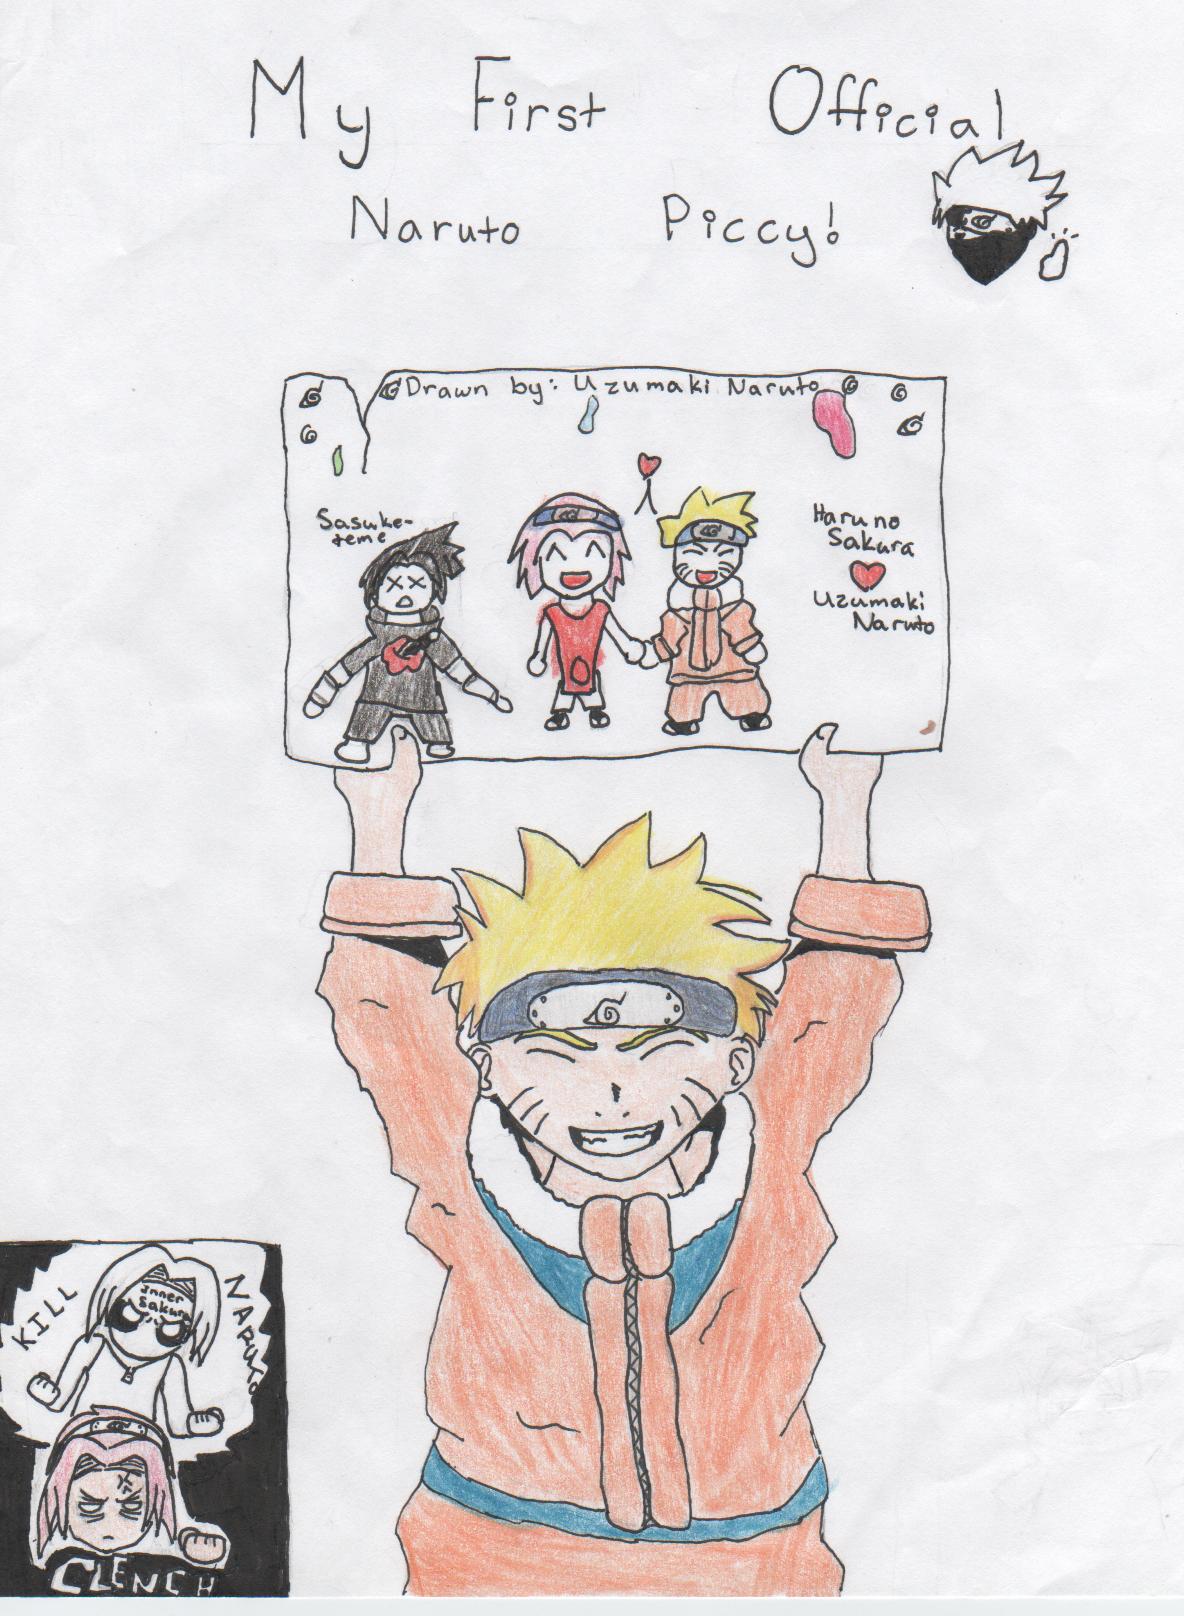 Naruto's drawing by SikameChan